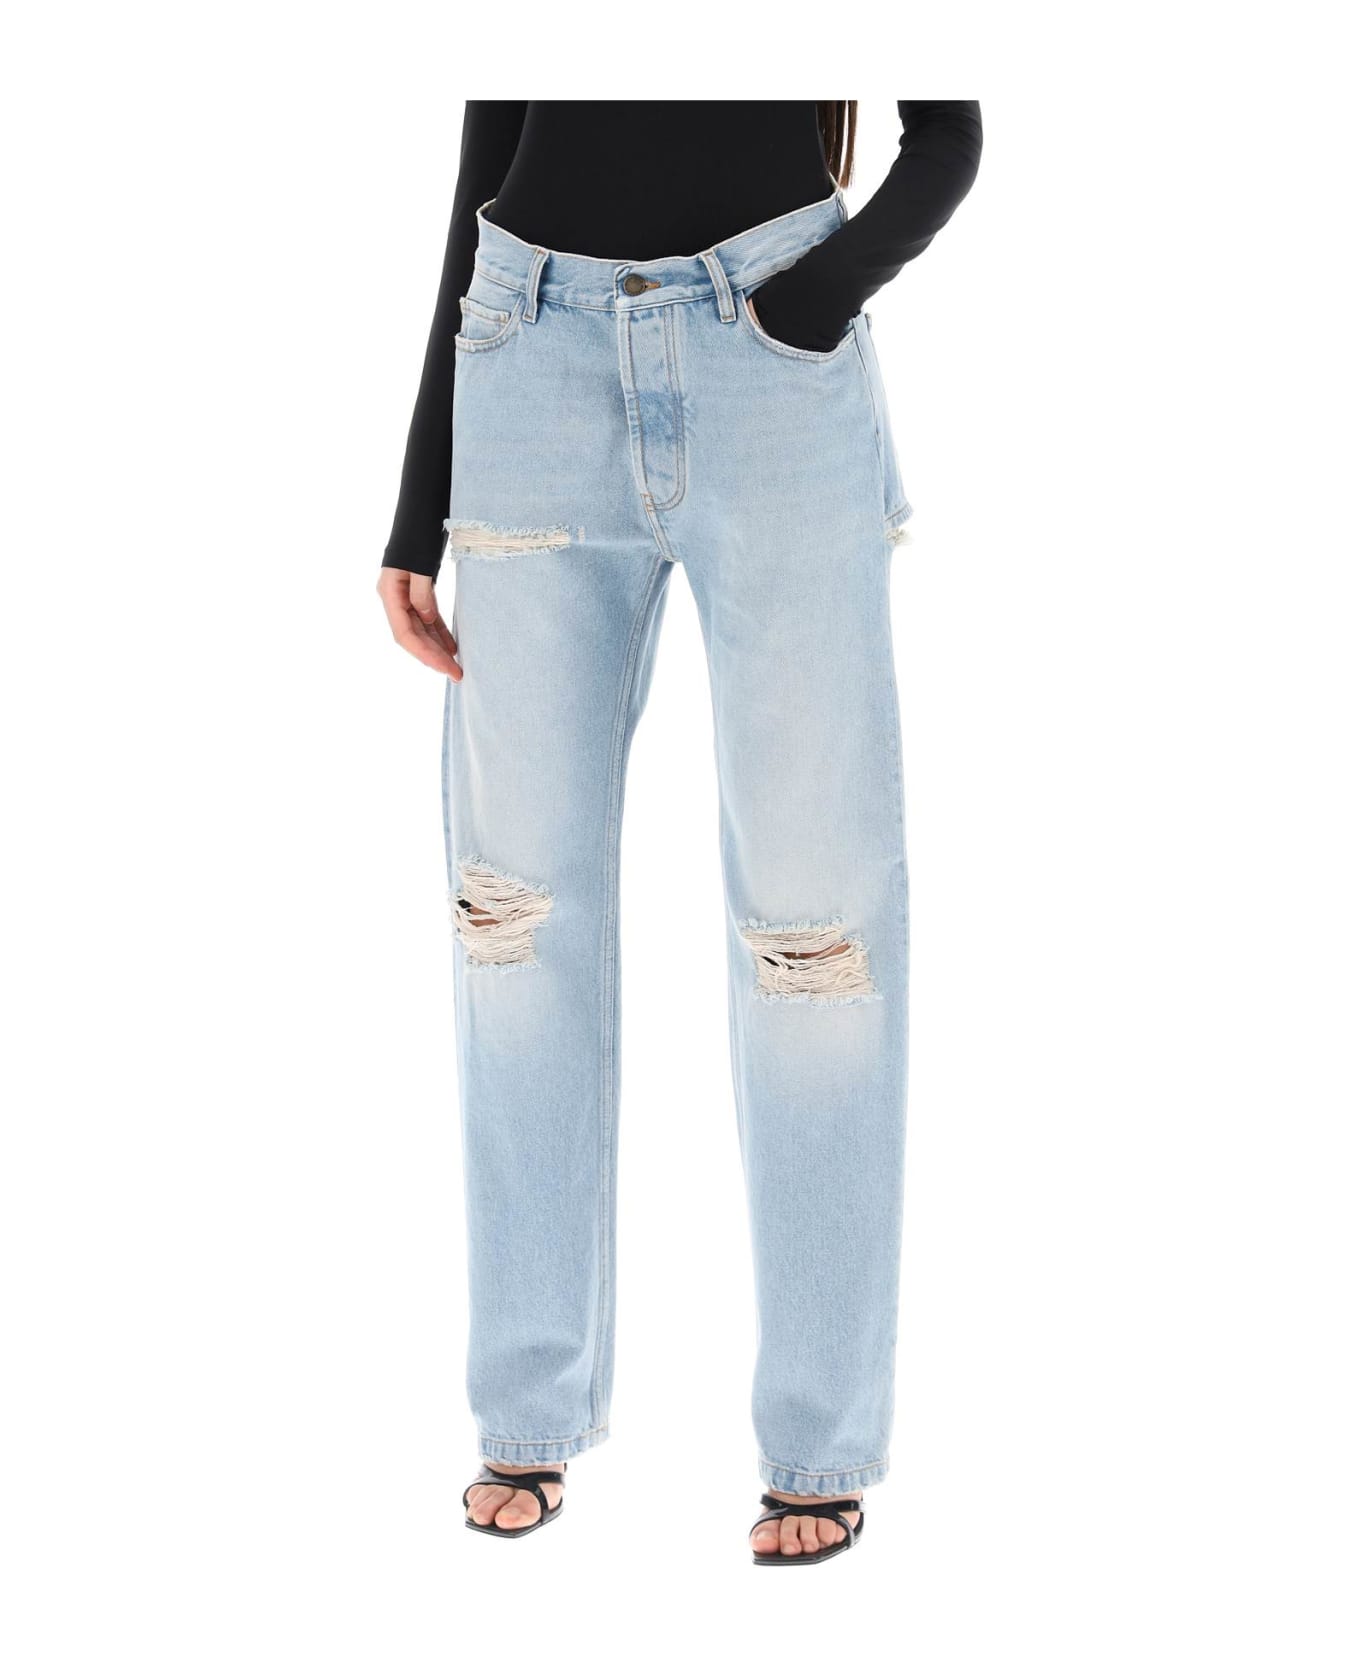 DARKPARK Naomi Jeans With Rips And Cut Outs - BLUE